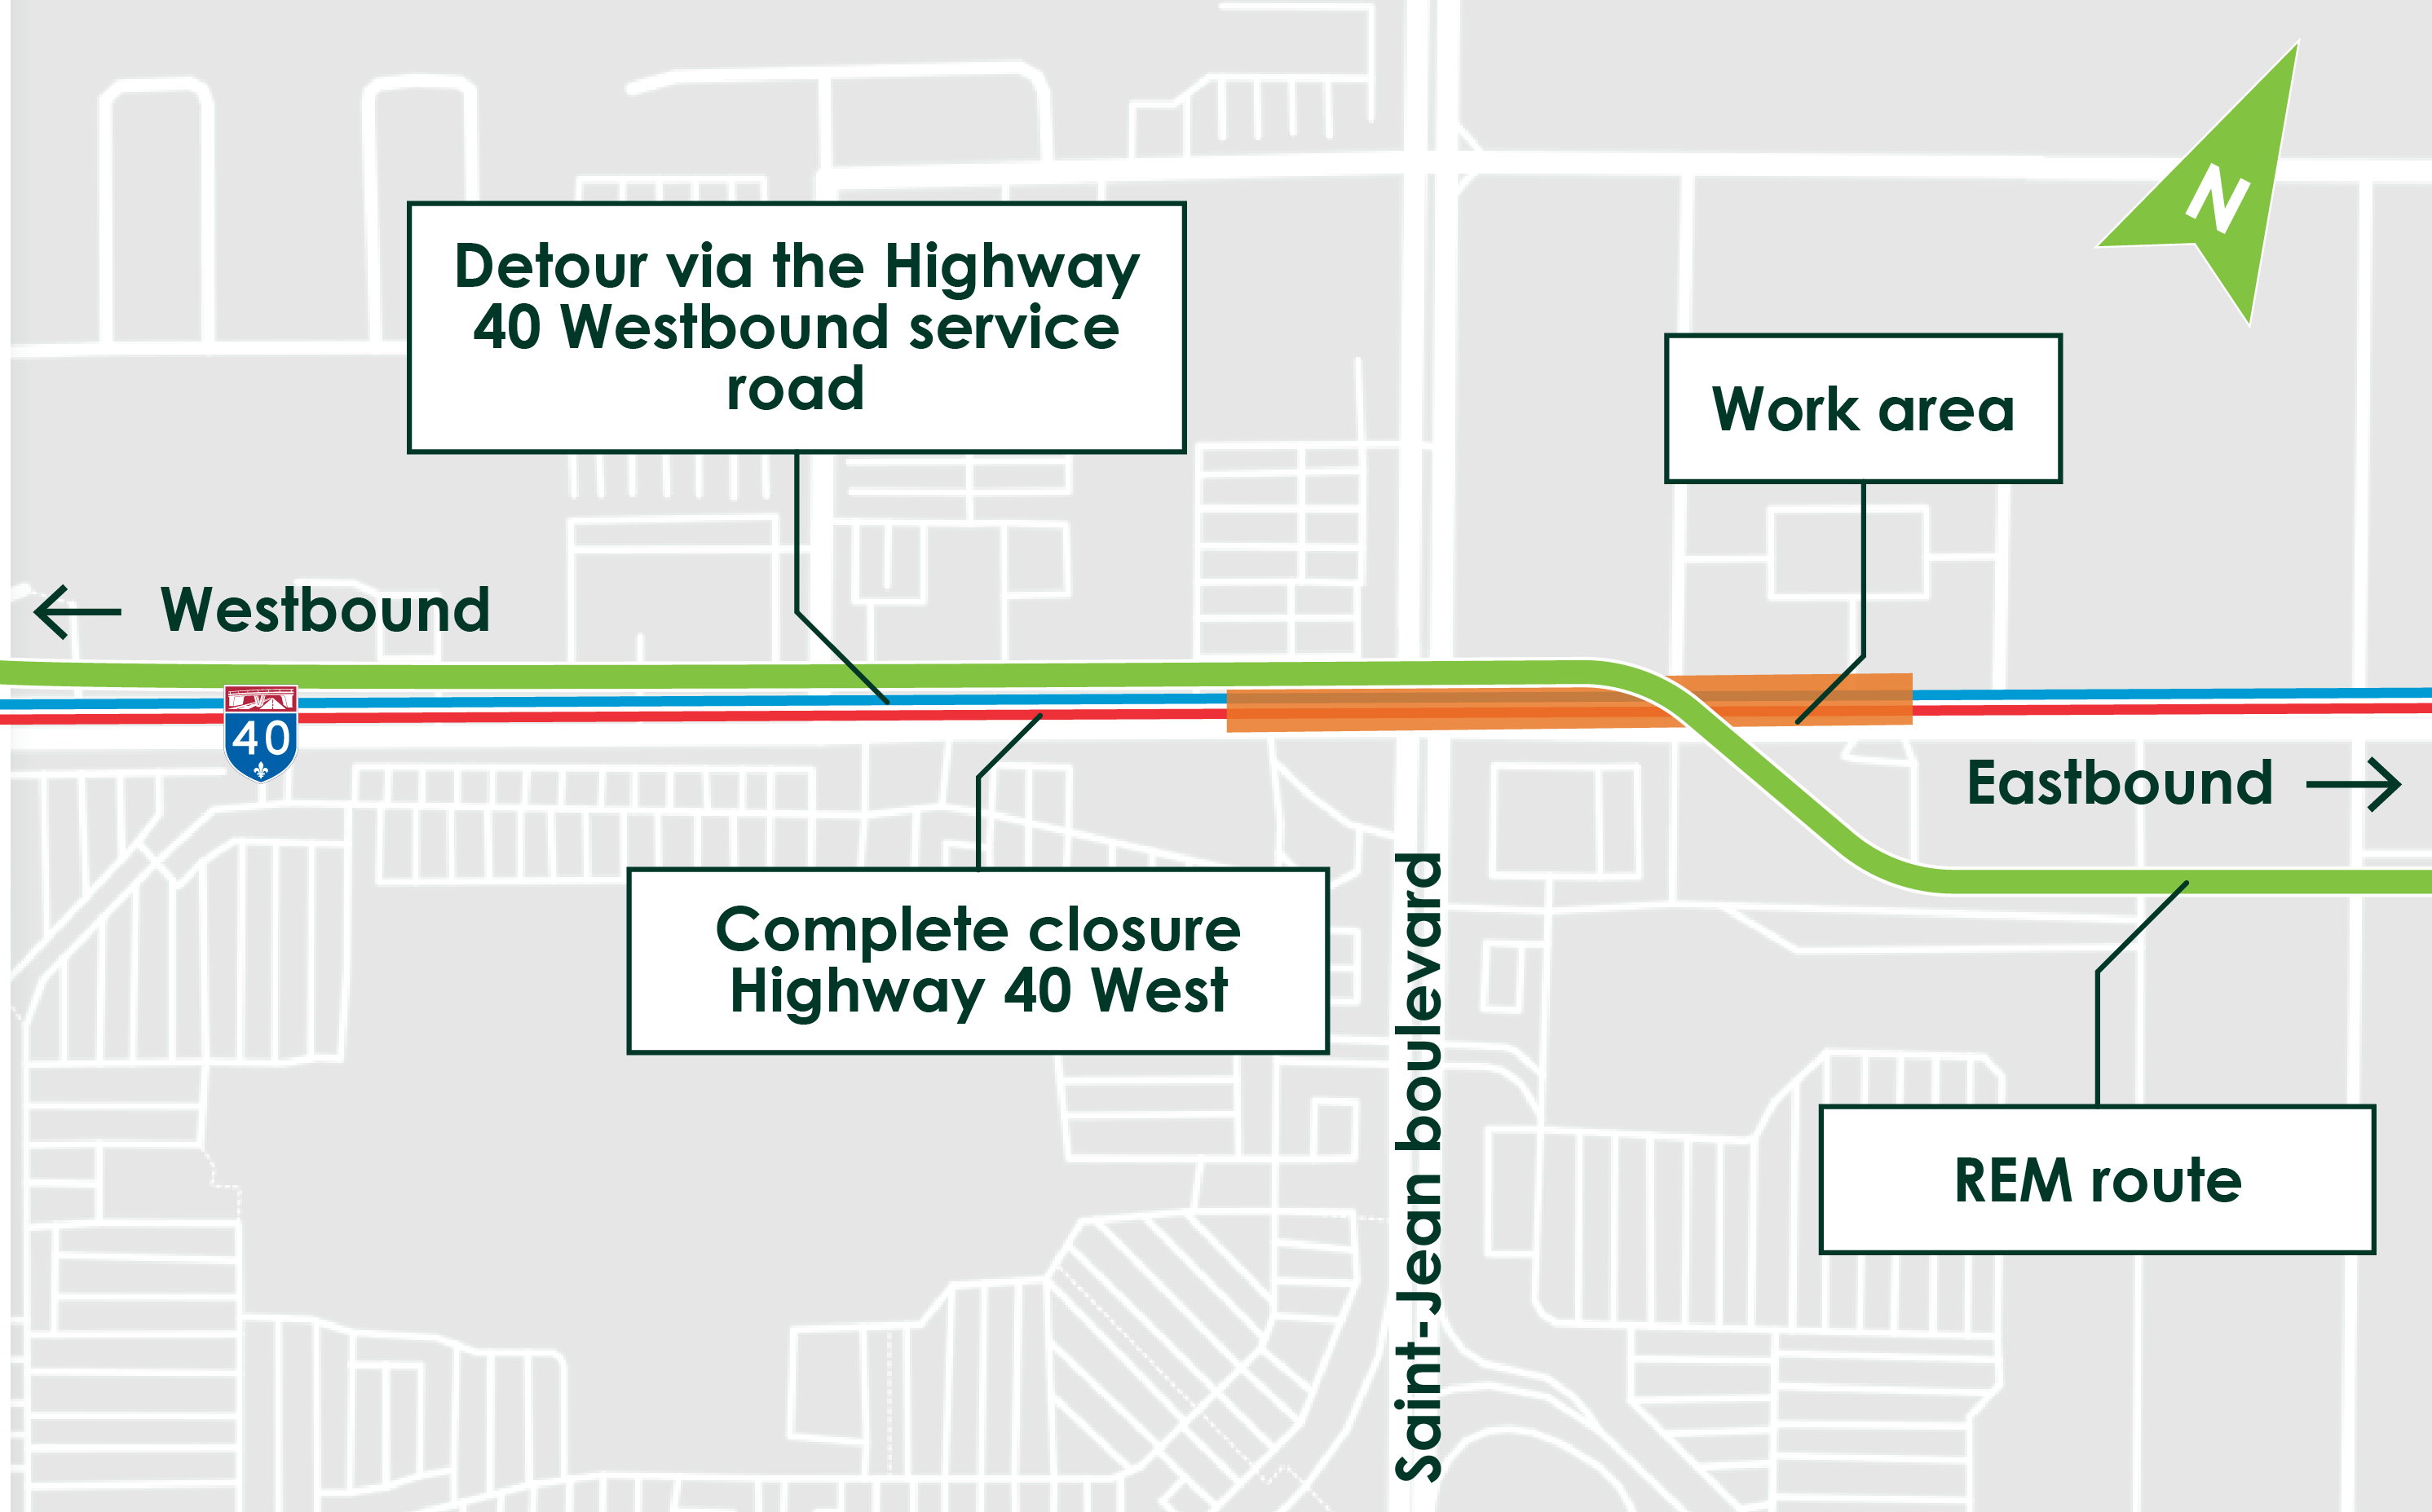 Stage 2, Complete closure of Highway 40 West